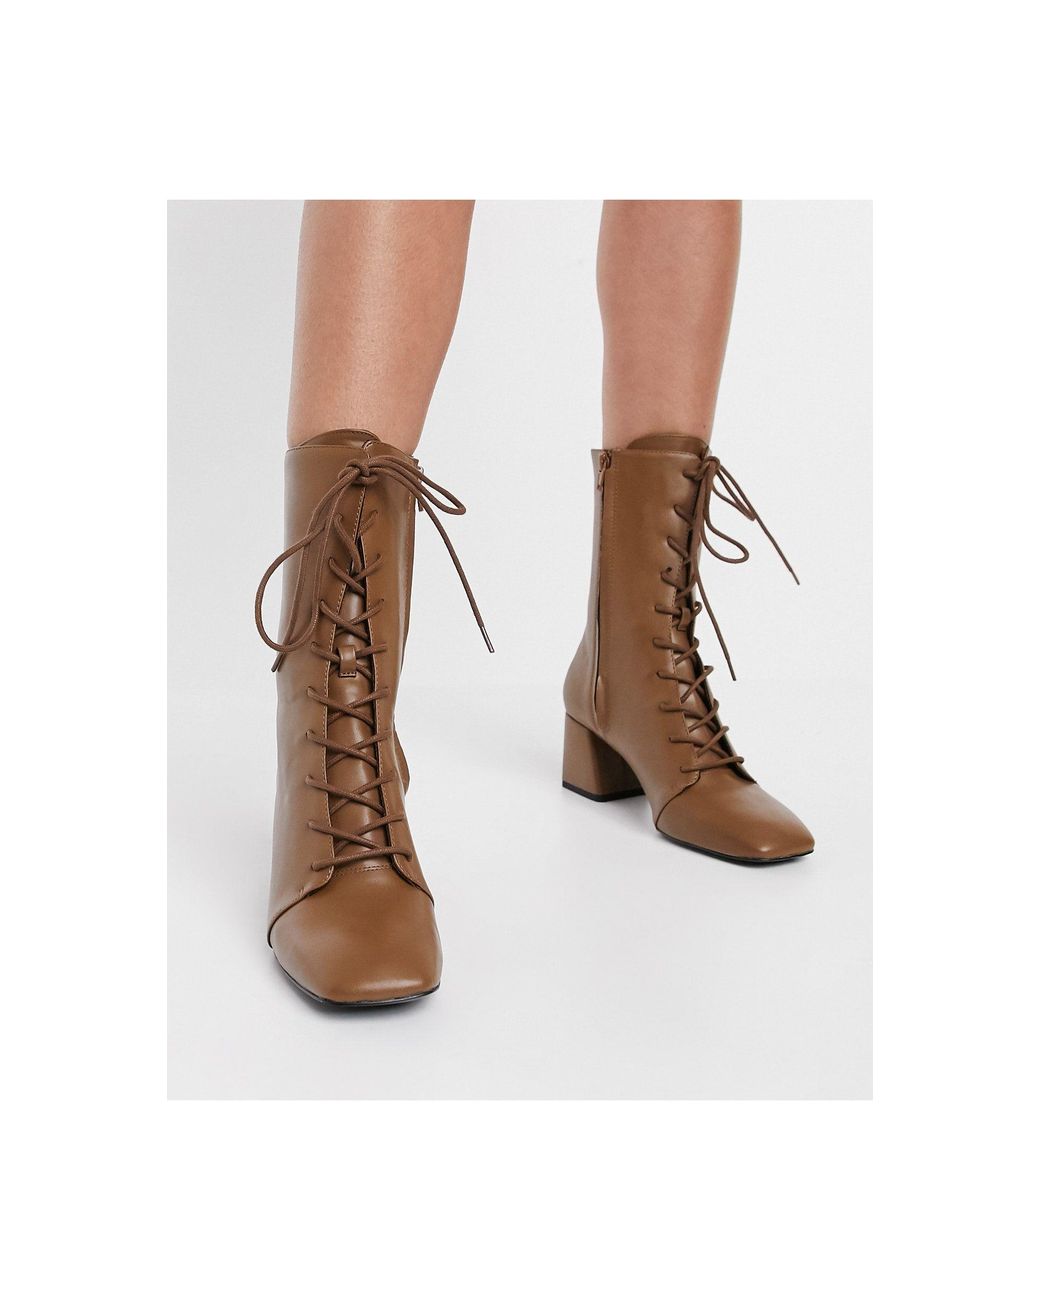 Monki Thelma Vegan Leather Lace Up Heeled Boot in Brown | Lyst